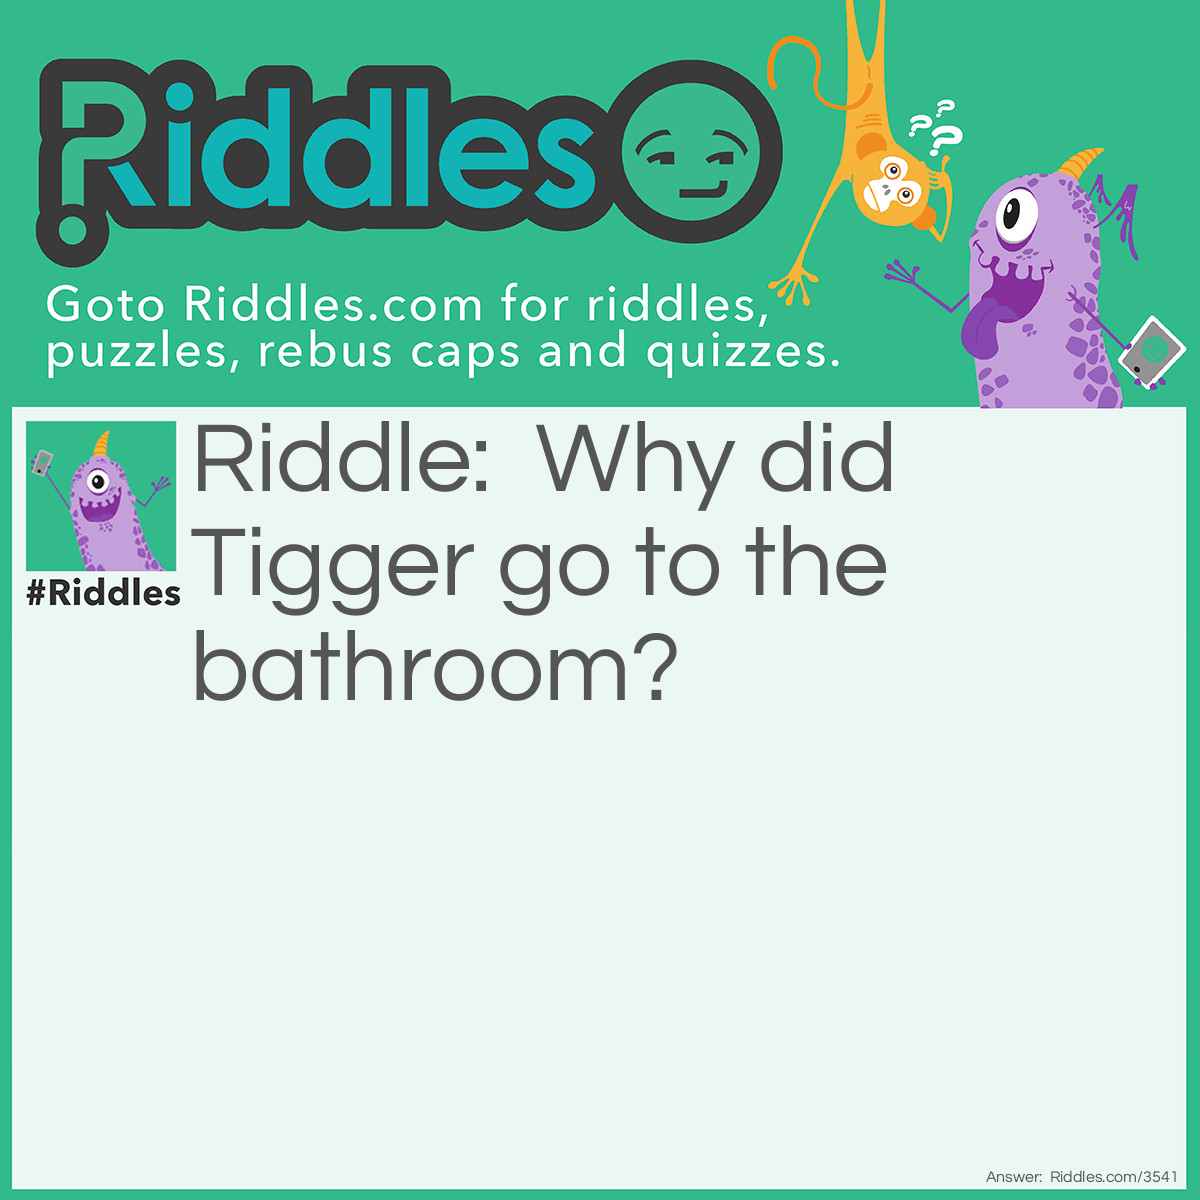 Riddle: Why did Tigger go to the bathroom? Answer: He wanted to find his friend, Pooh!